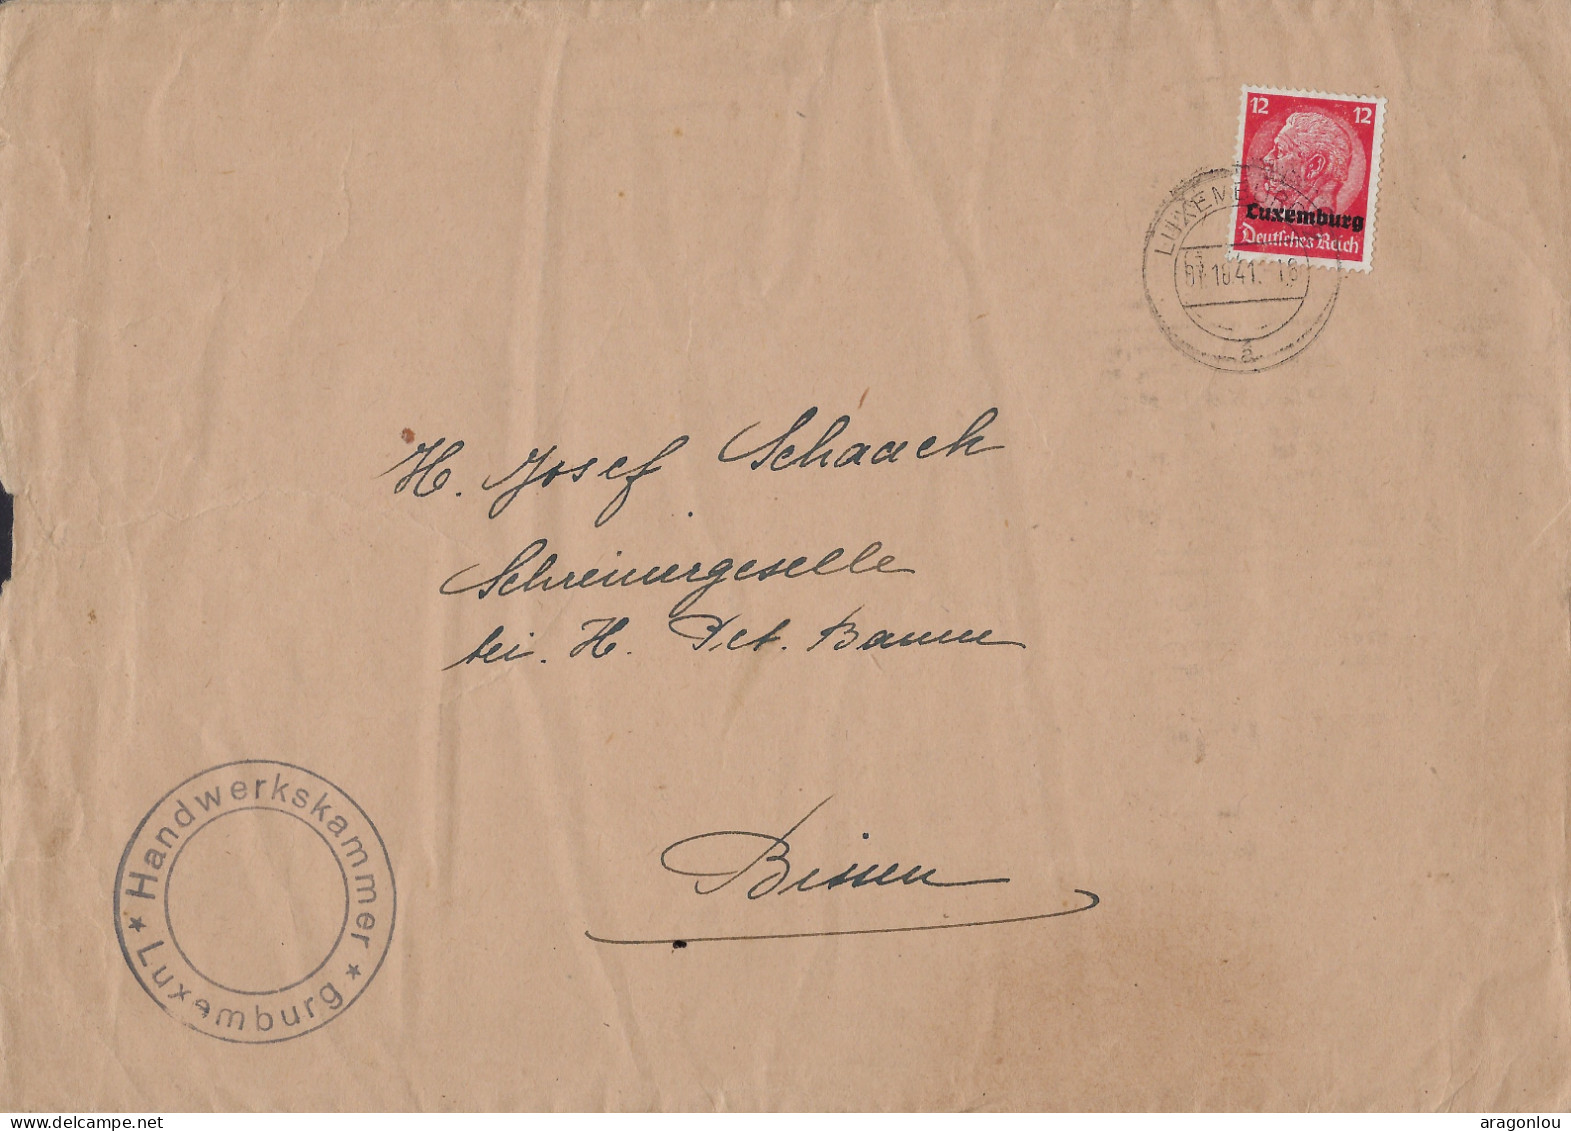 Luxembourg - Luxemburg -   Lettre  Occupation   1941 - 1940-1944 Occupazione Tedesca